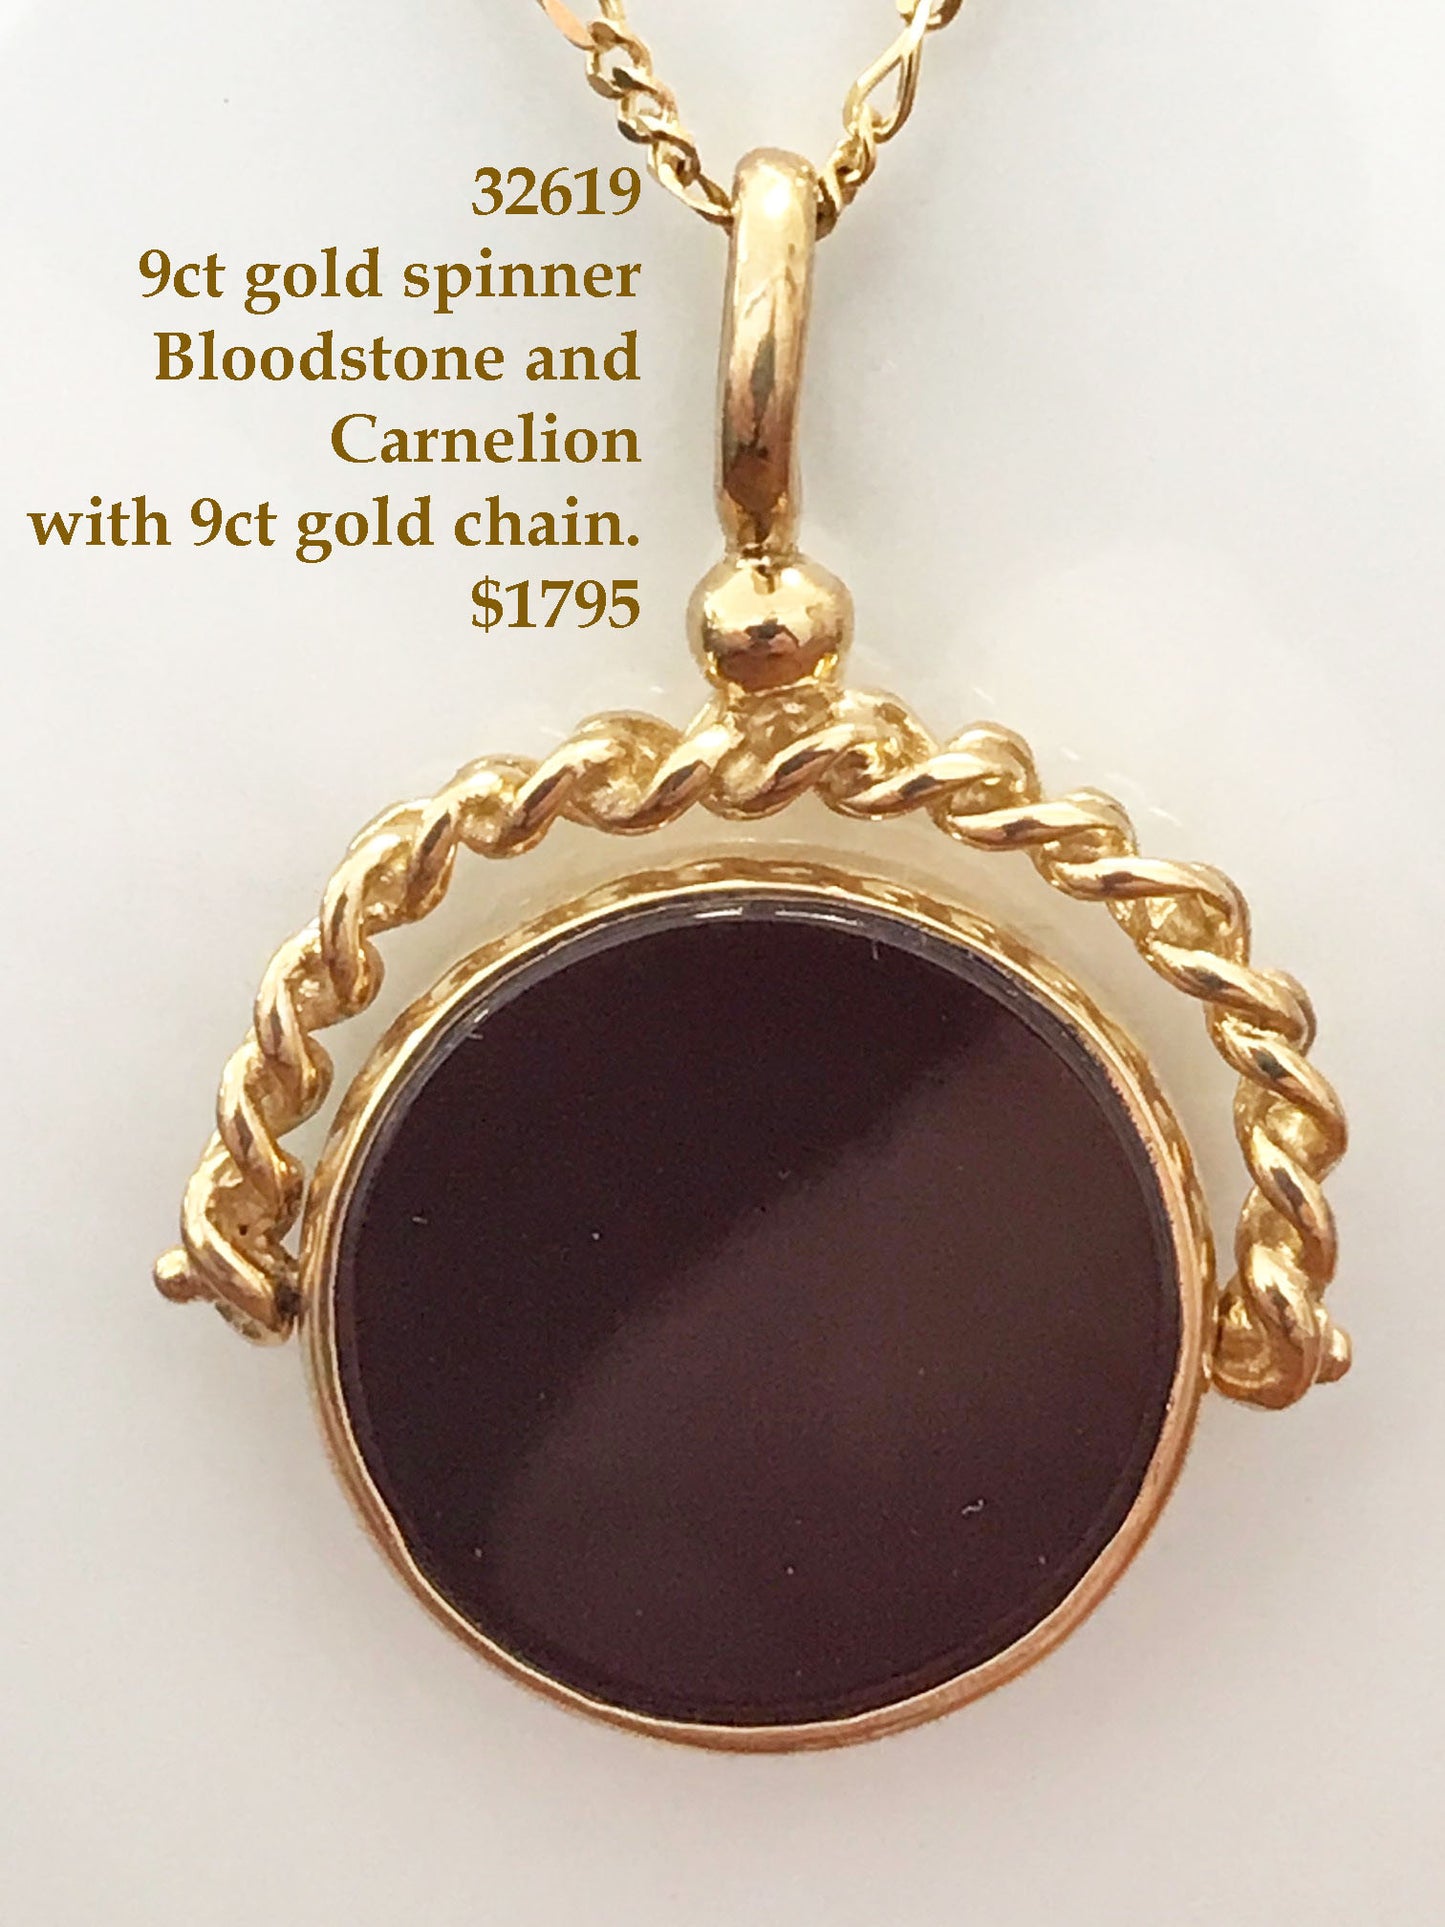 Spinner pendant and gold chain.